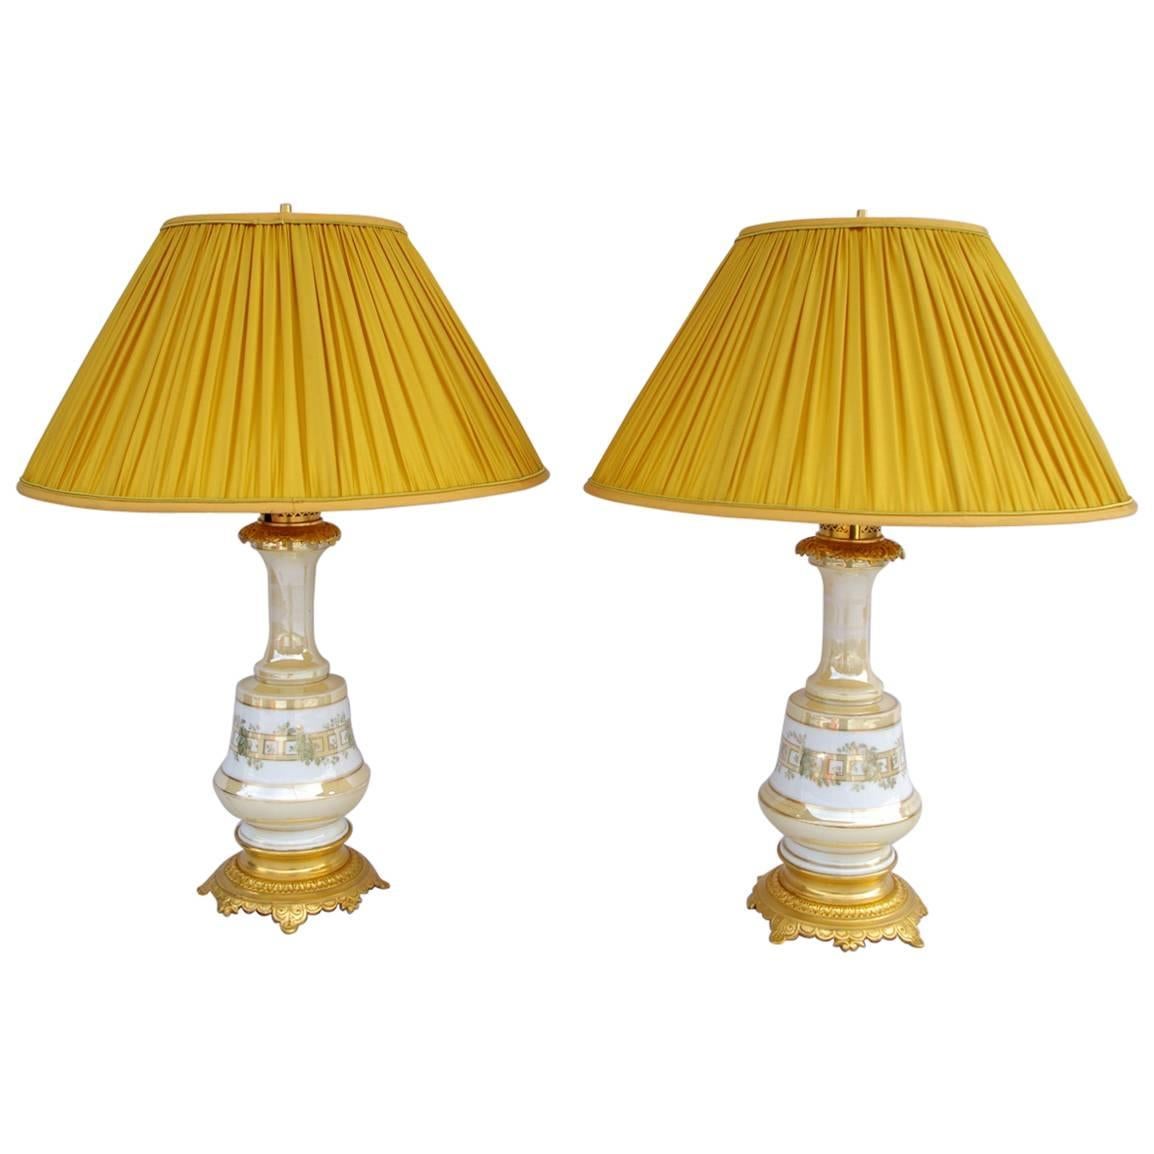 Pair of Iridescent White and Cream Paris Porcelain Lamps, Mounted in Gilt Bronze